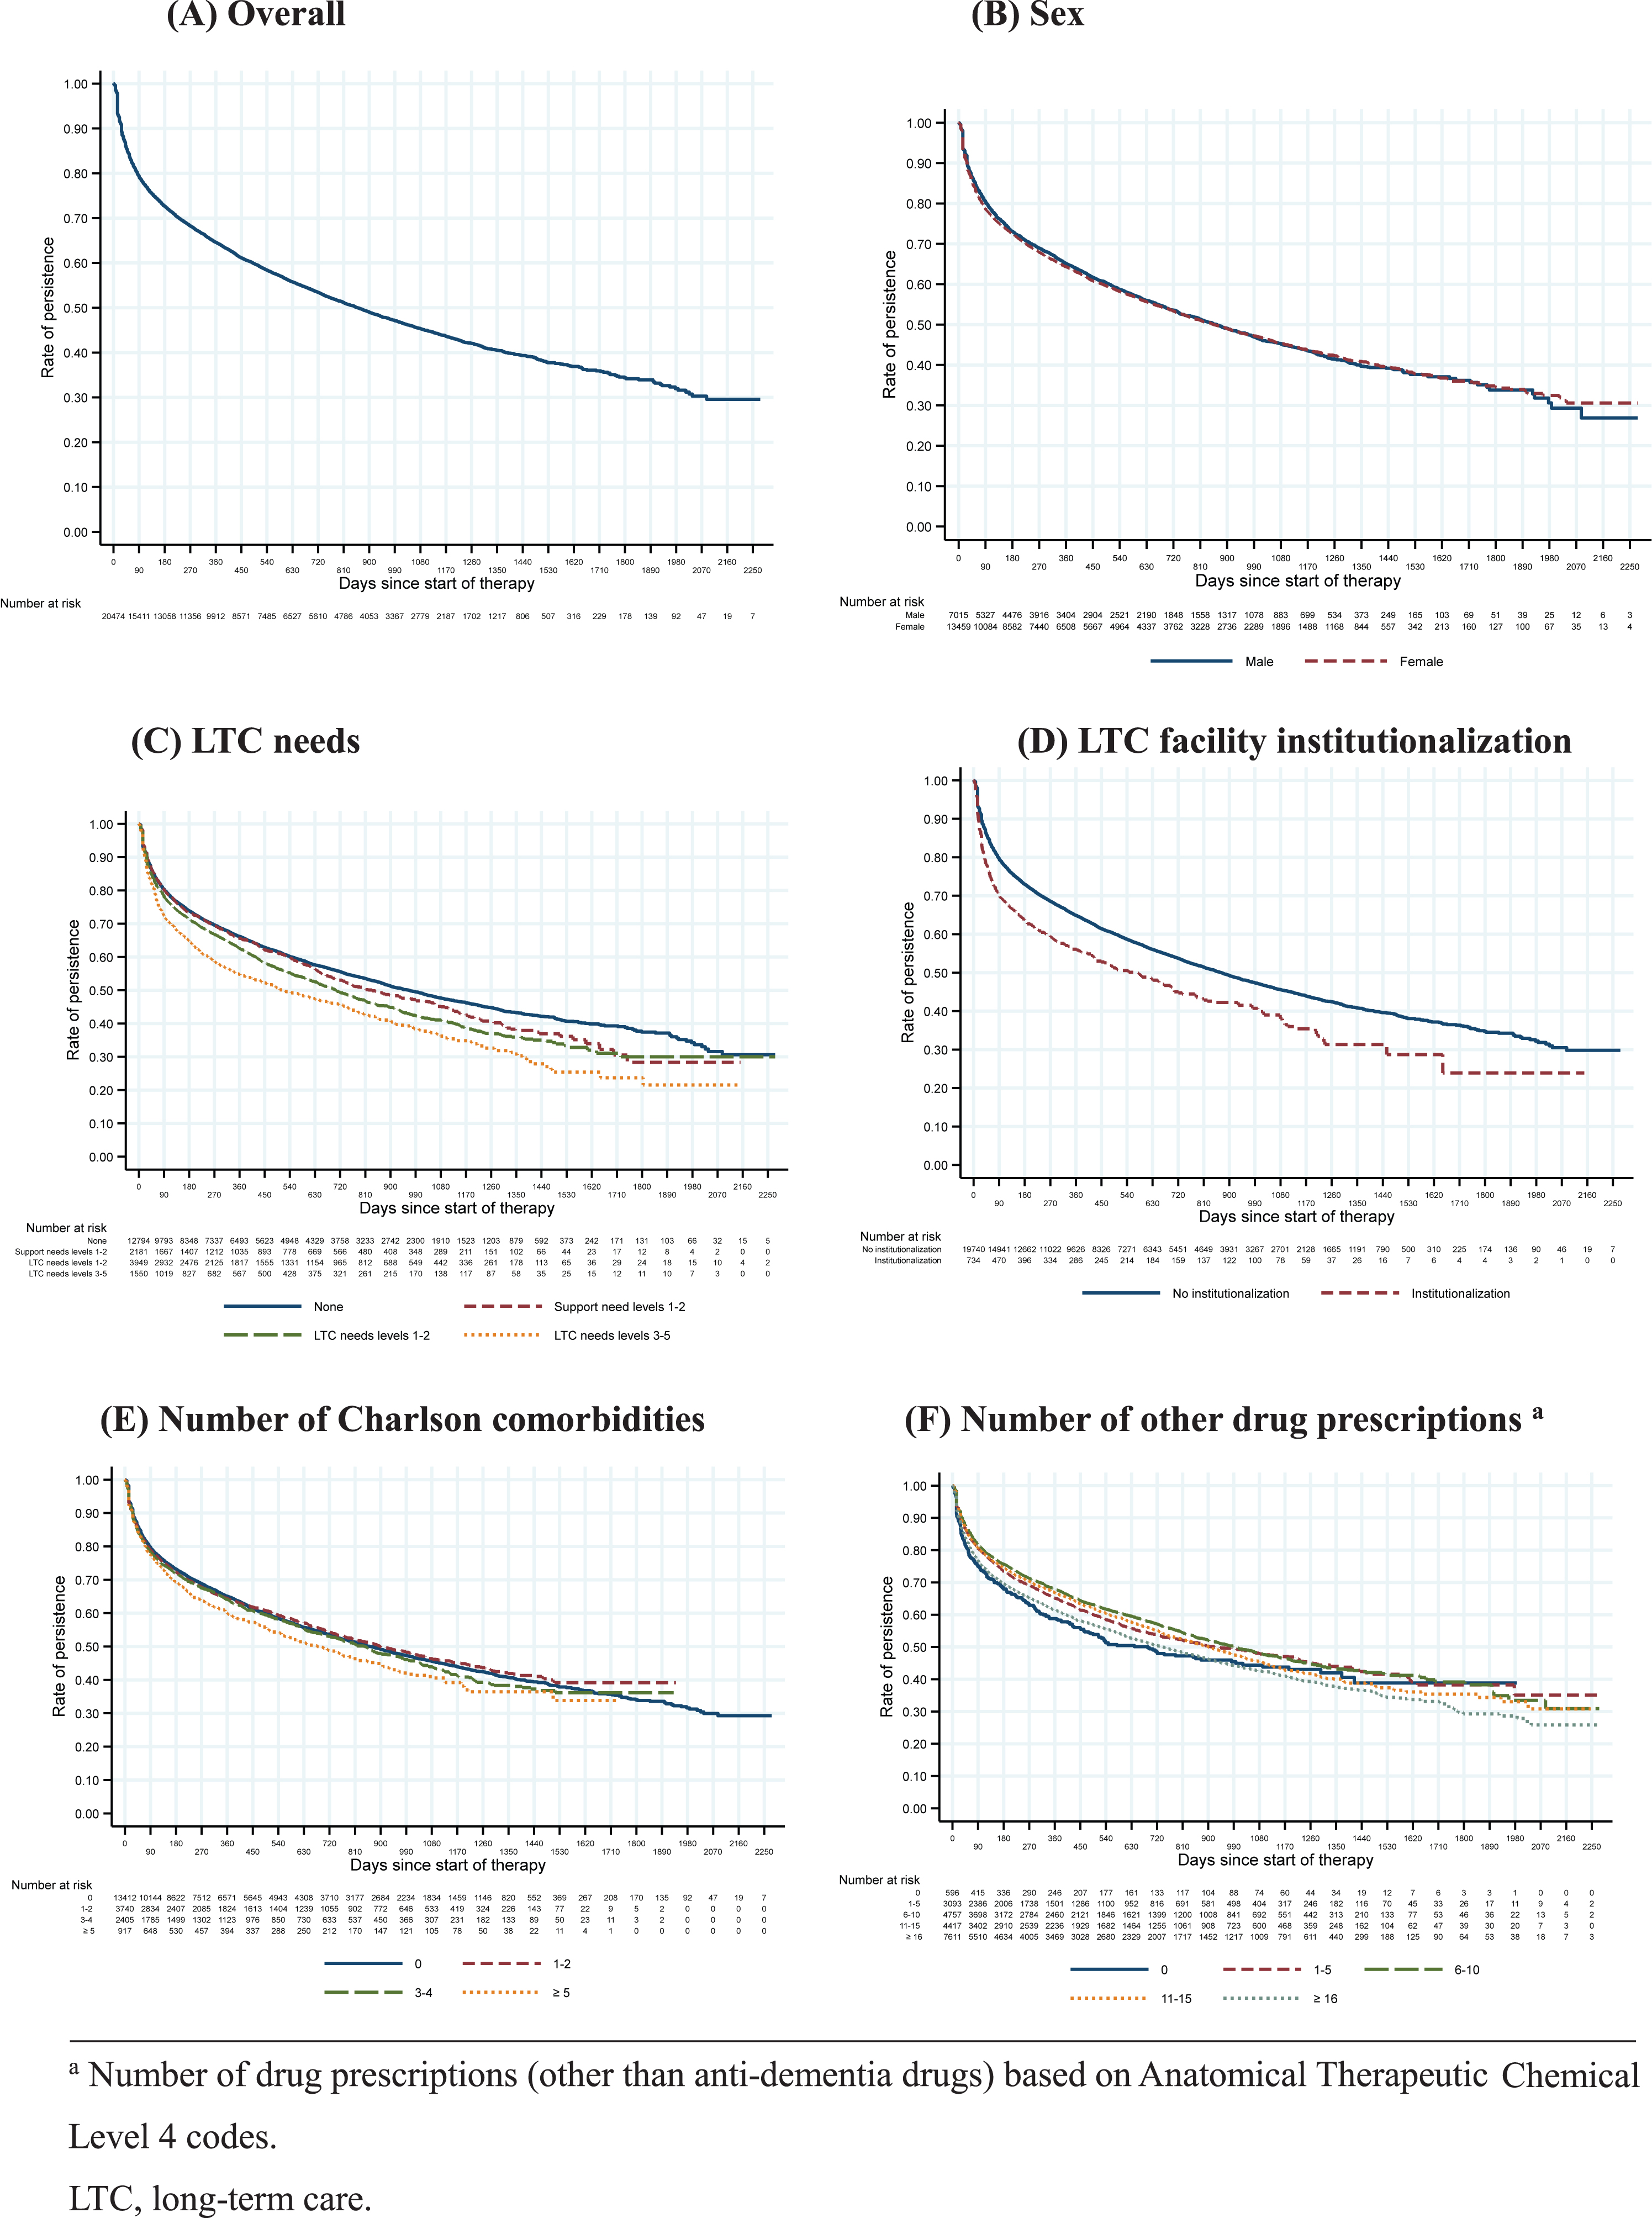 Kaplan– Meier curves of anti-dementia drug persistence following donepezil initiation according to patient characteristics.